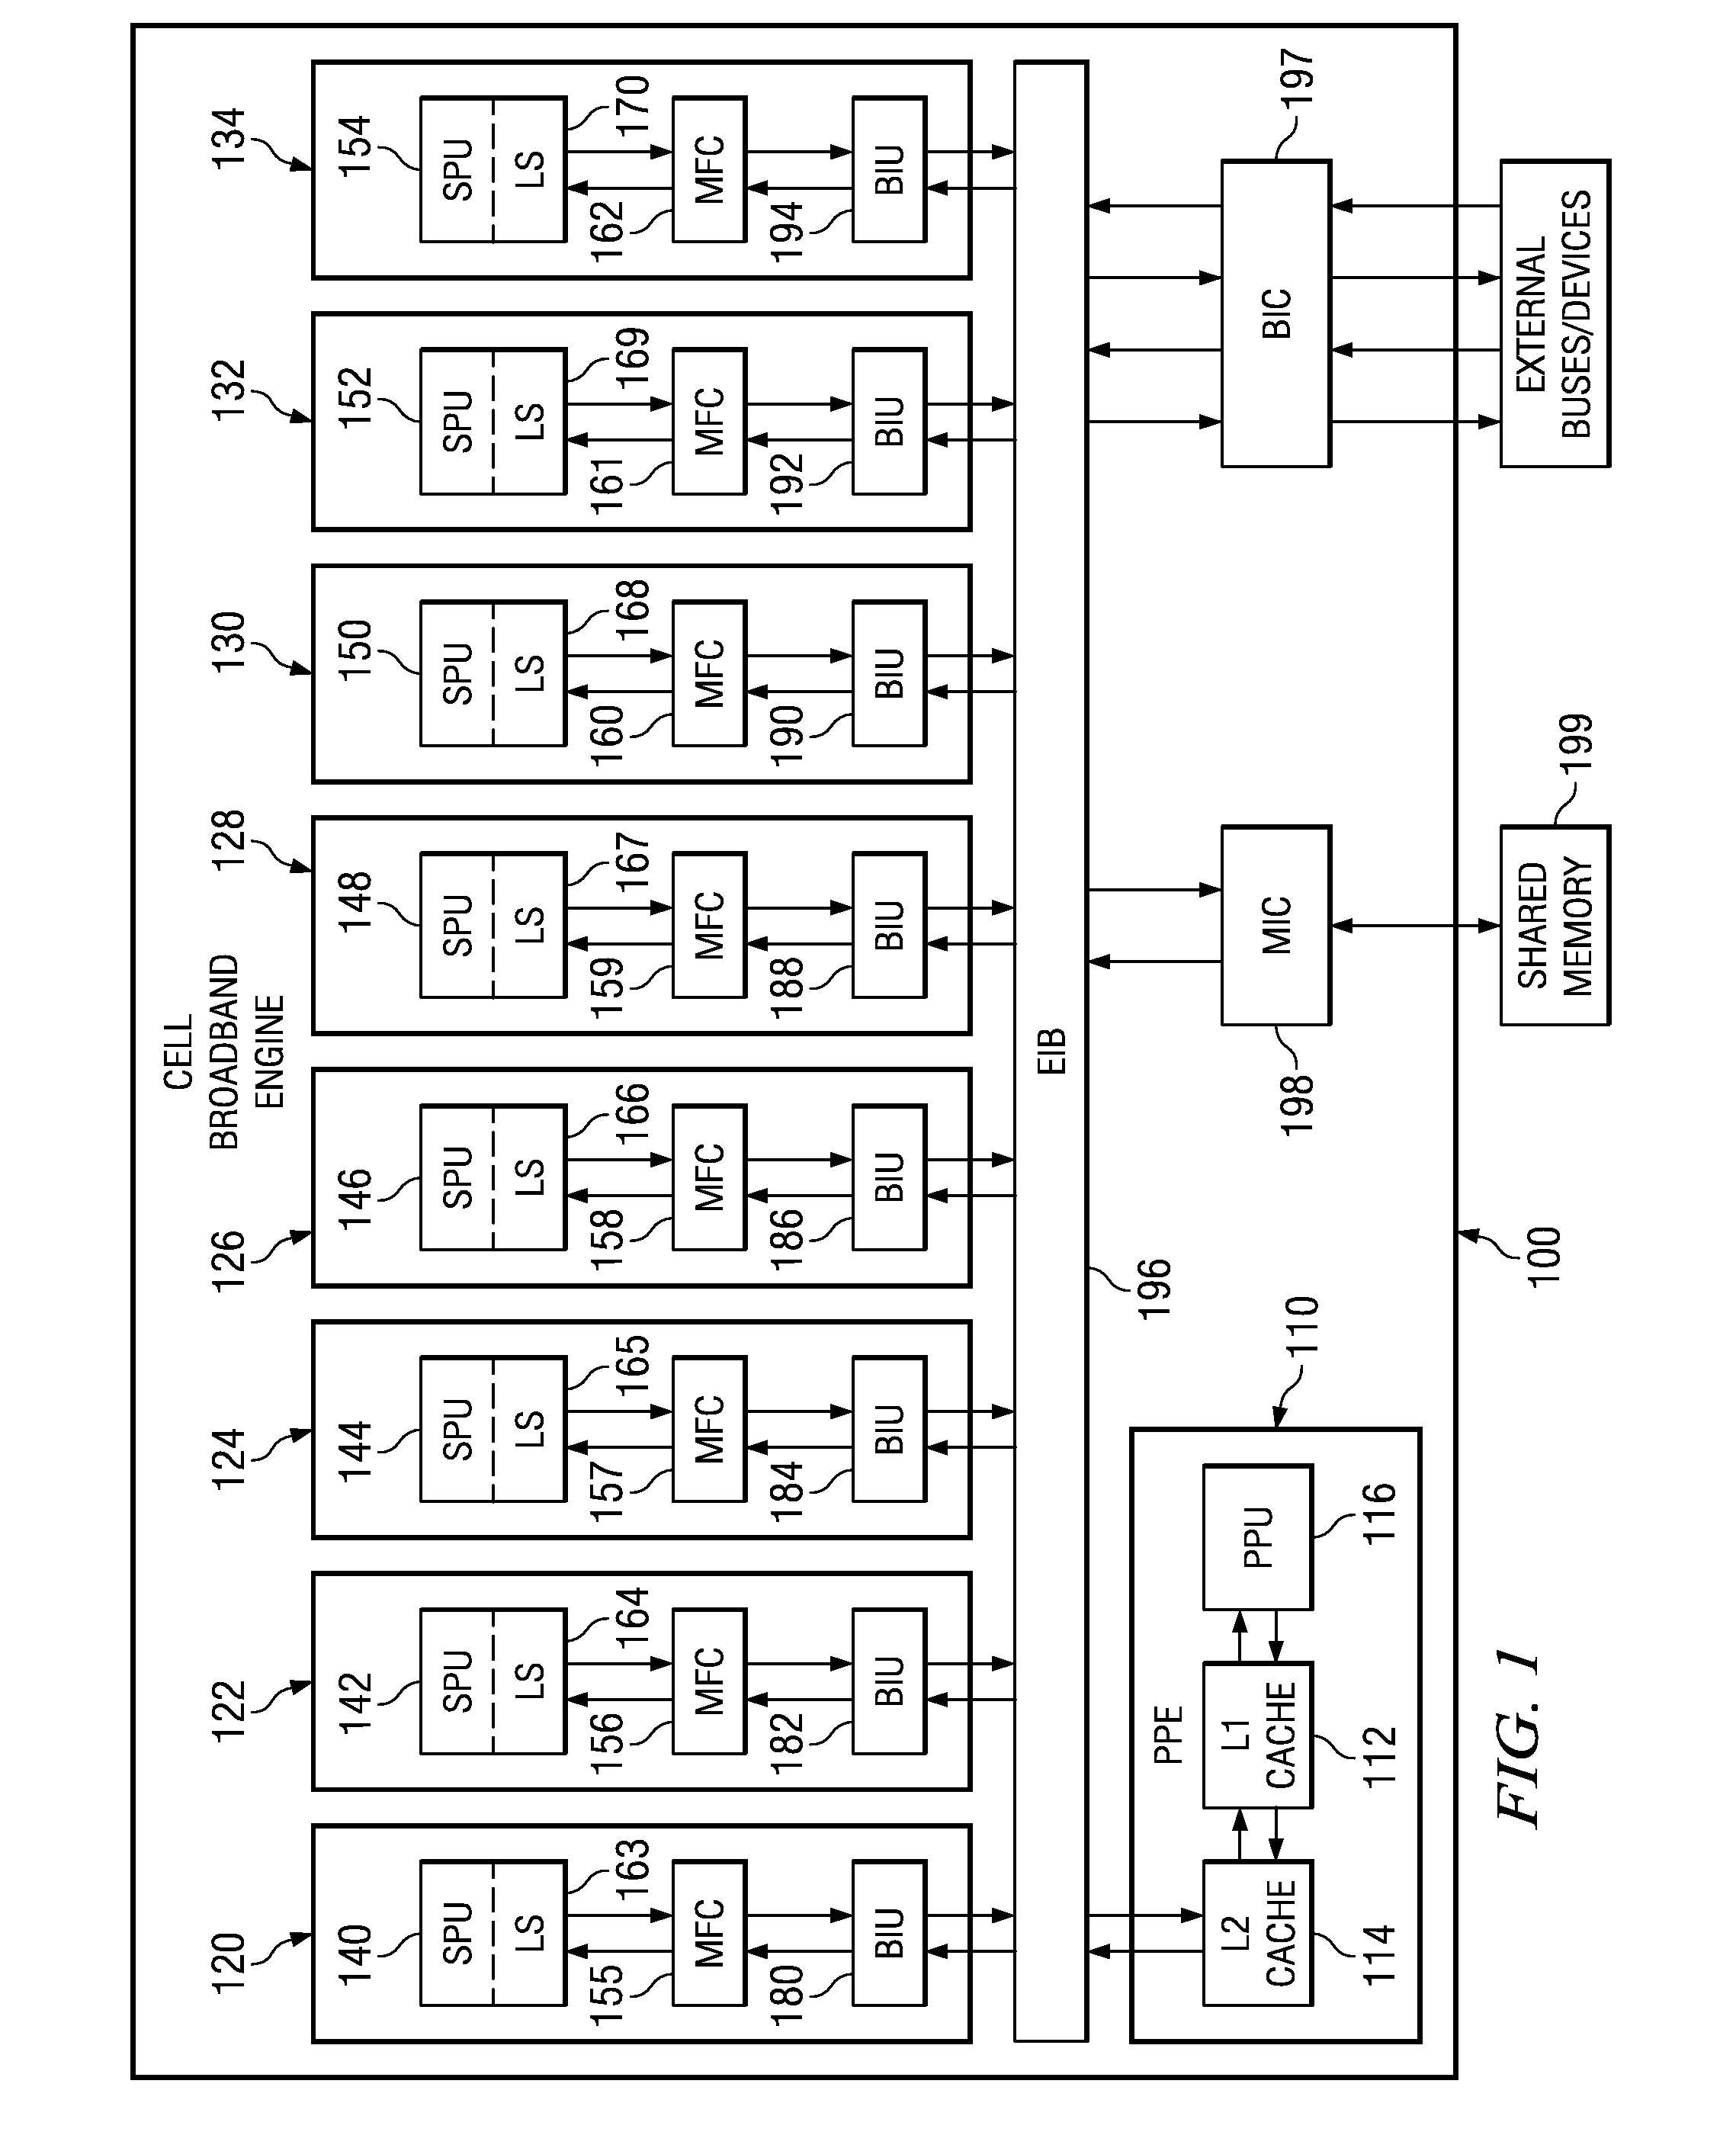 System and Method to Efficiently Prefetch and Batch Compiler-Assisted Software Cache Accesses